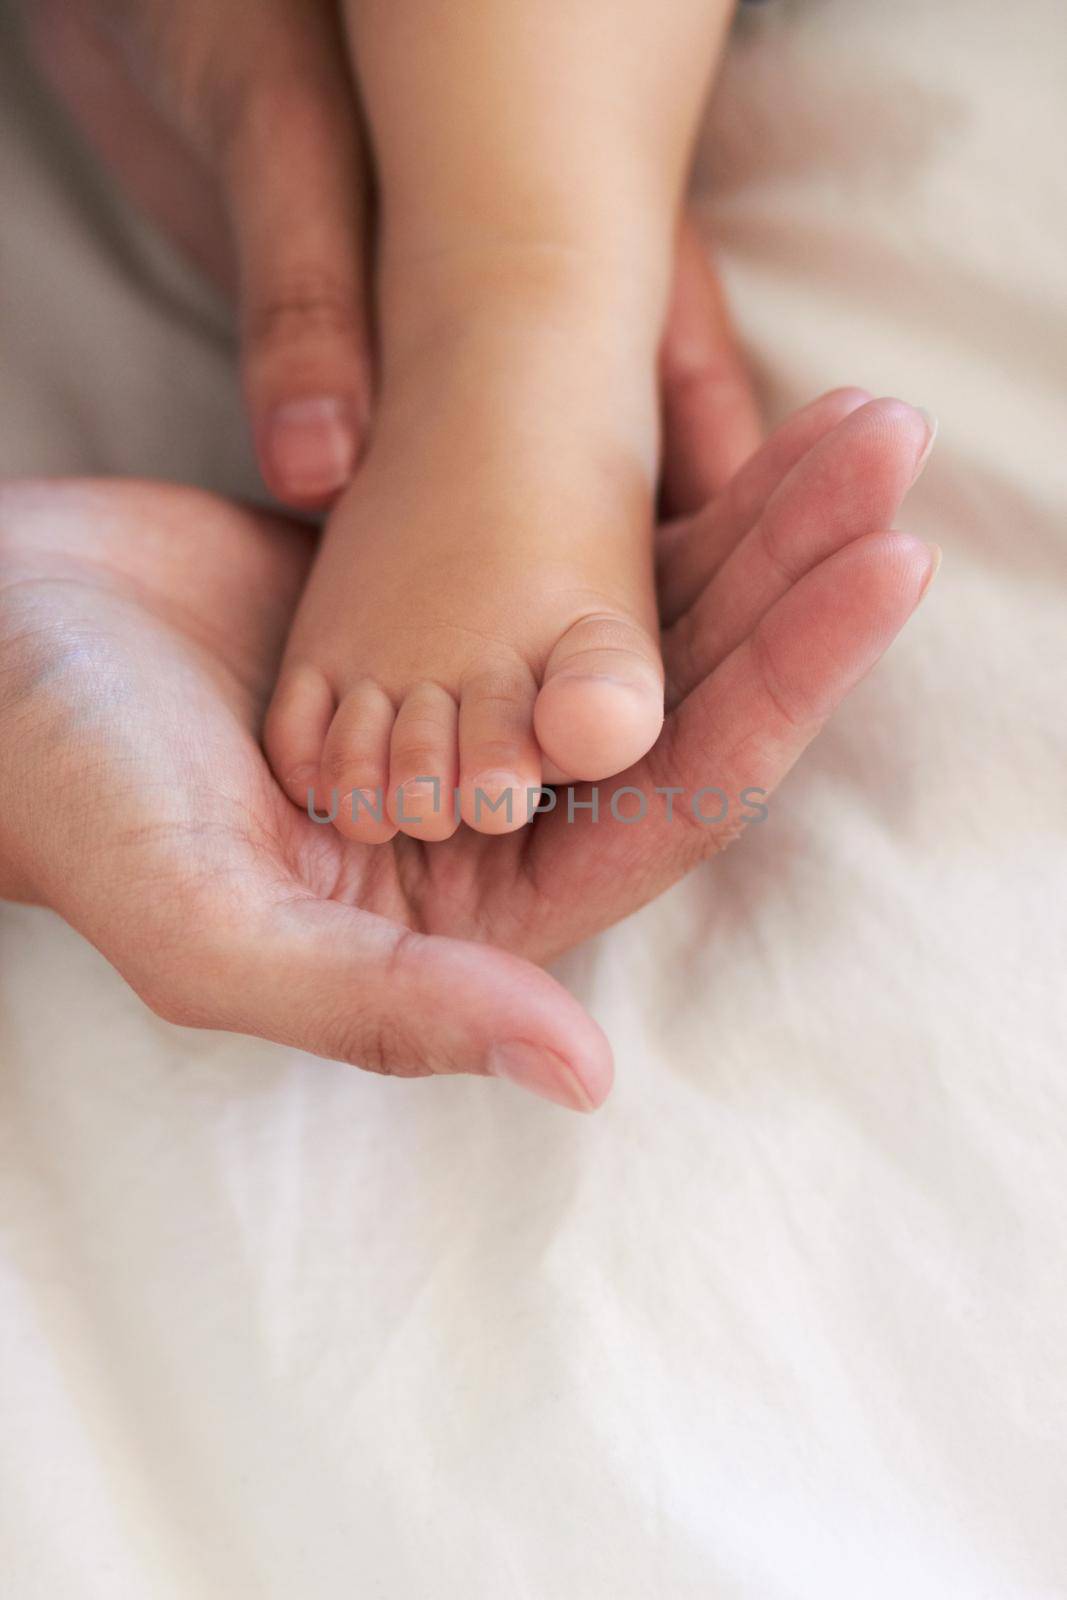 Cropped image of a mothers hands holding her baby boys foot.